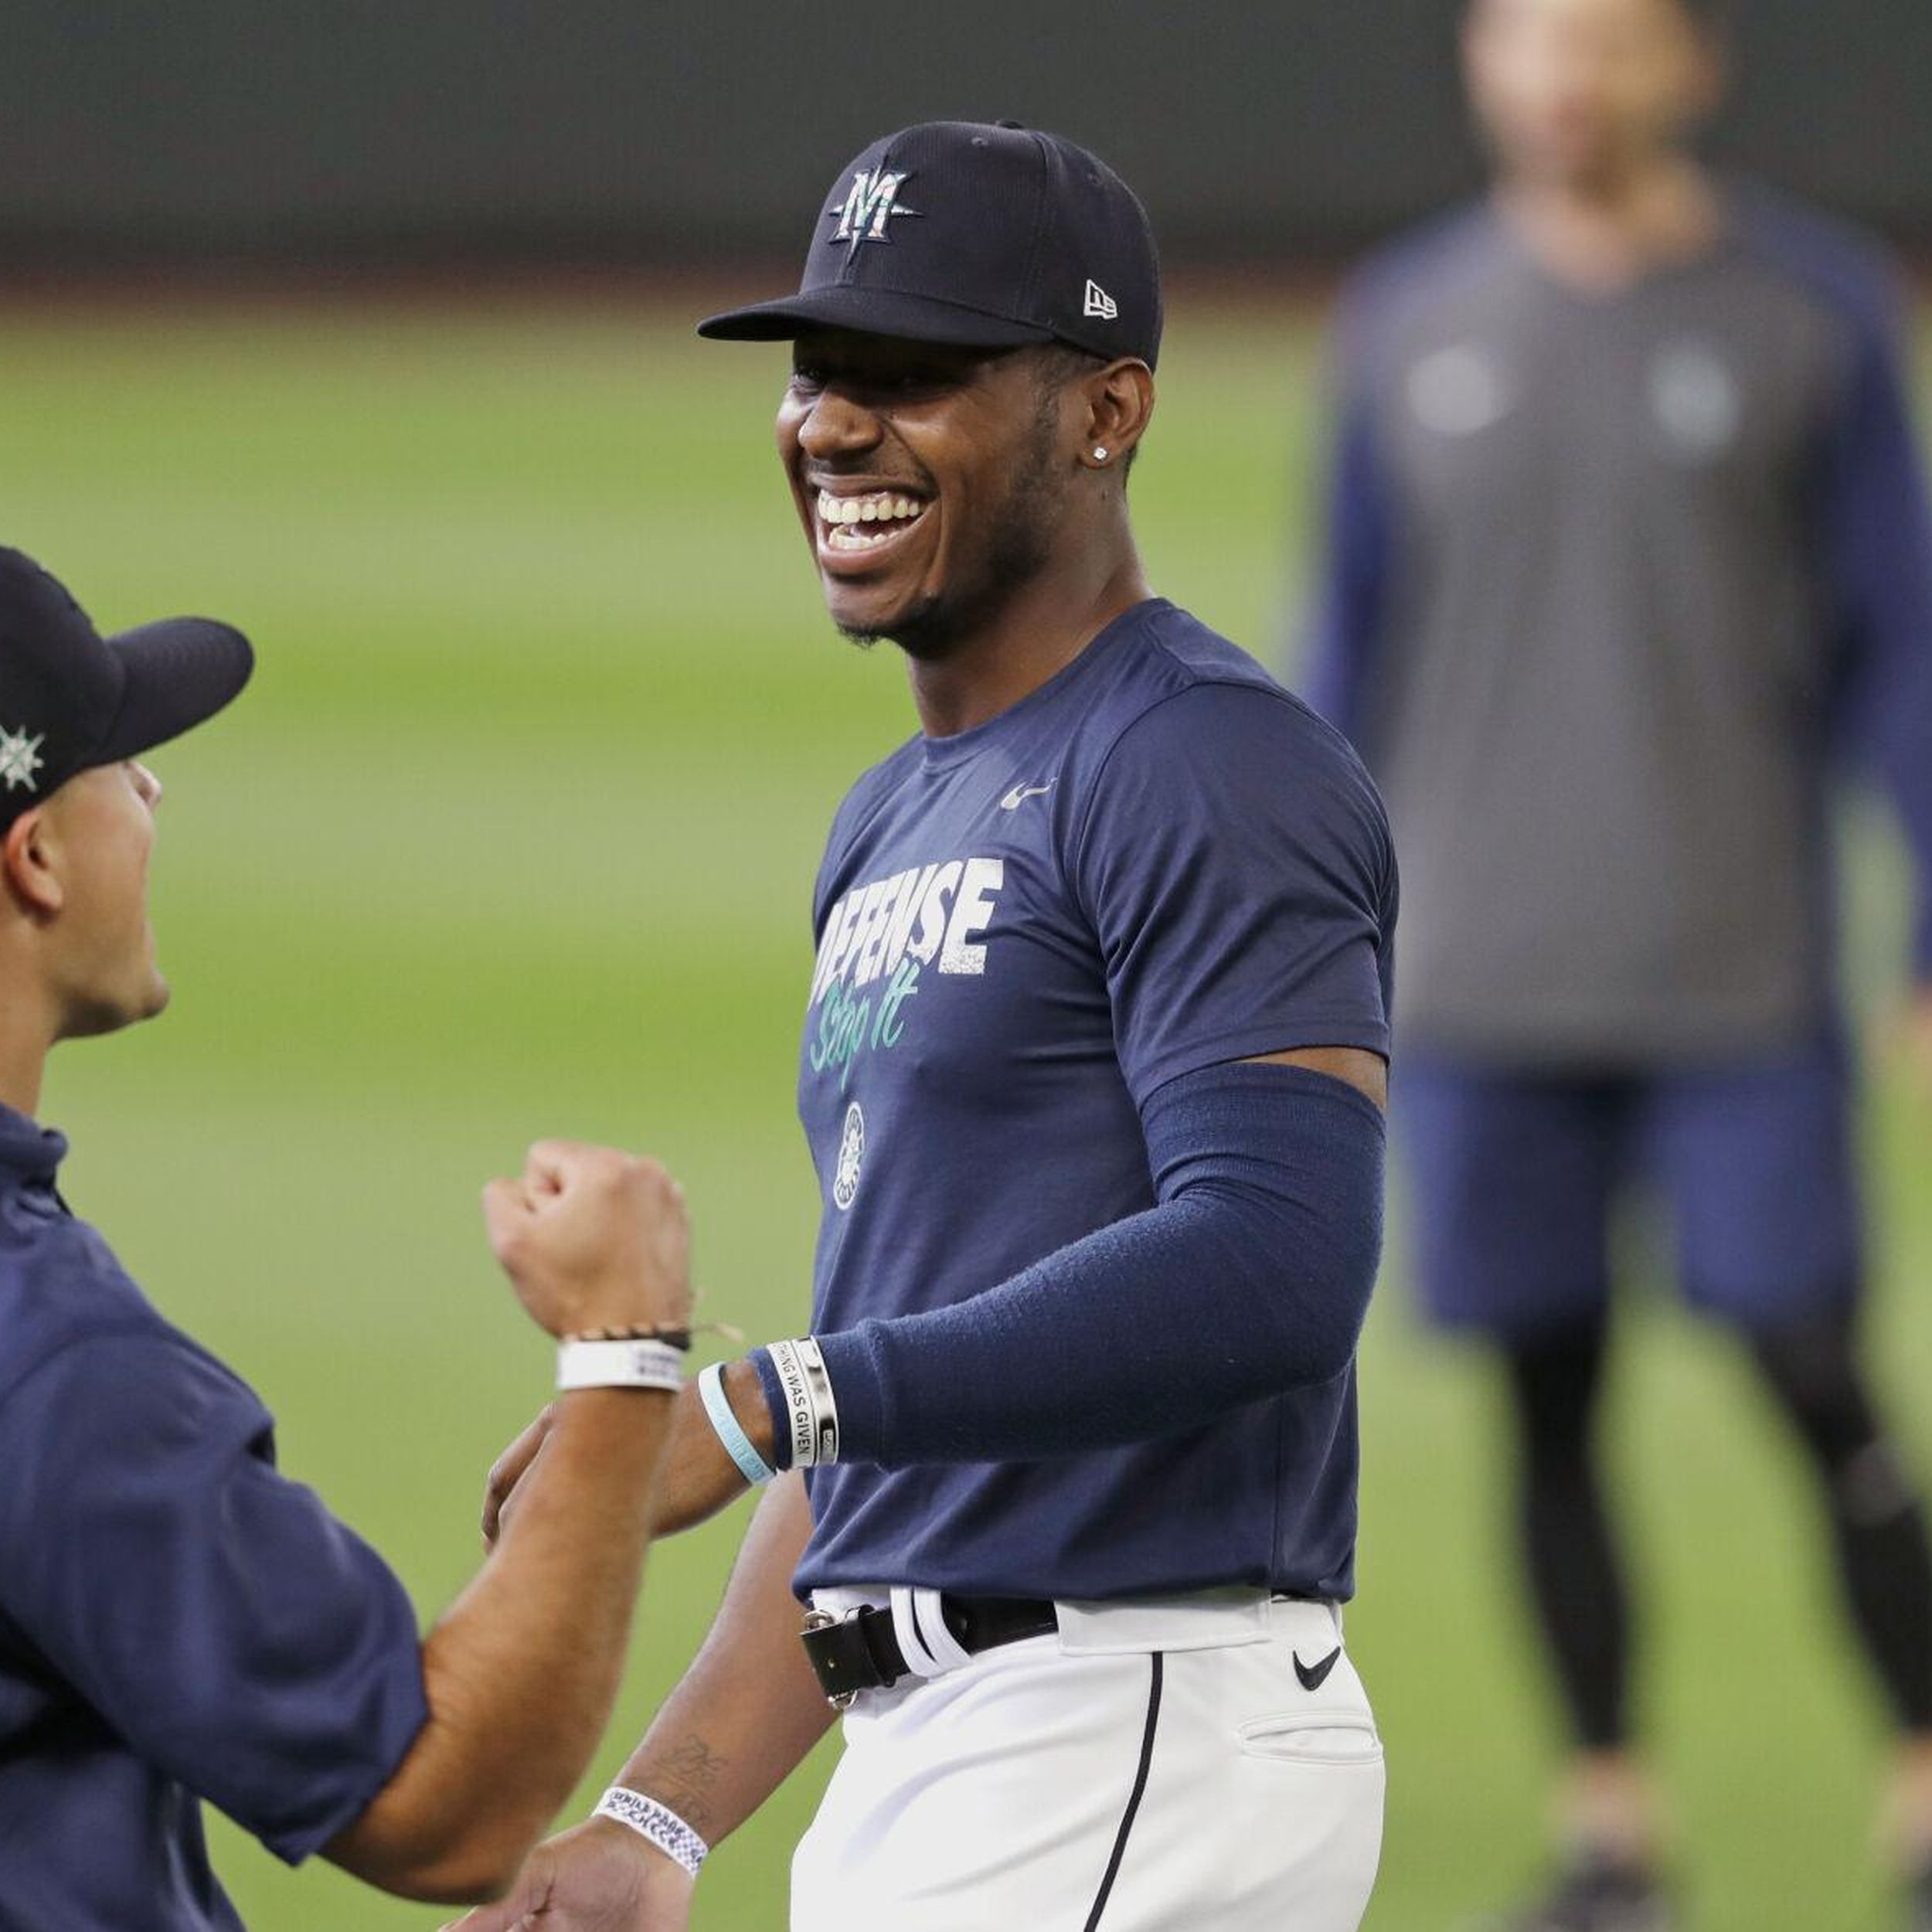 Even in shortened season, focus for Mariners is on future